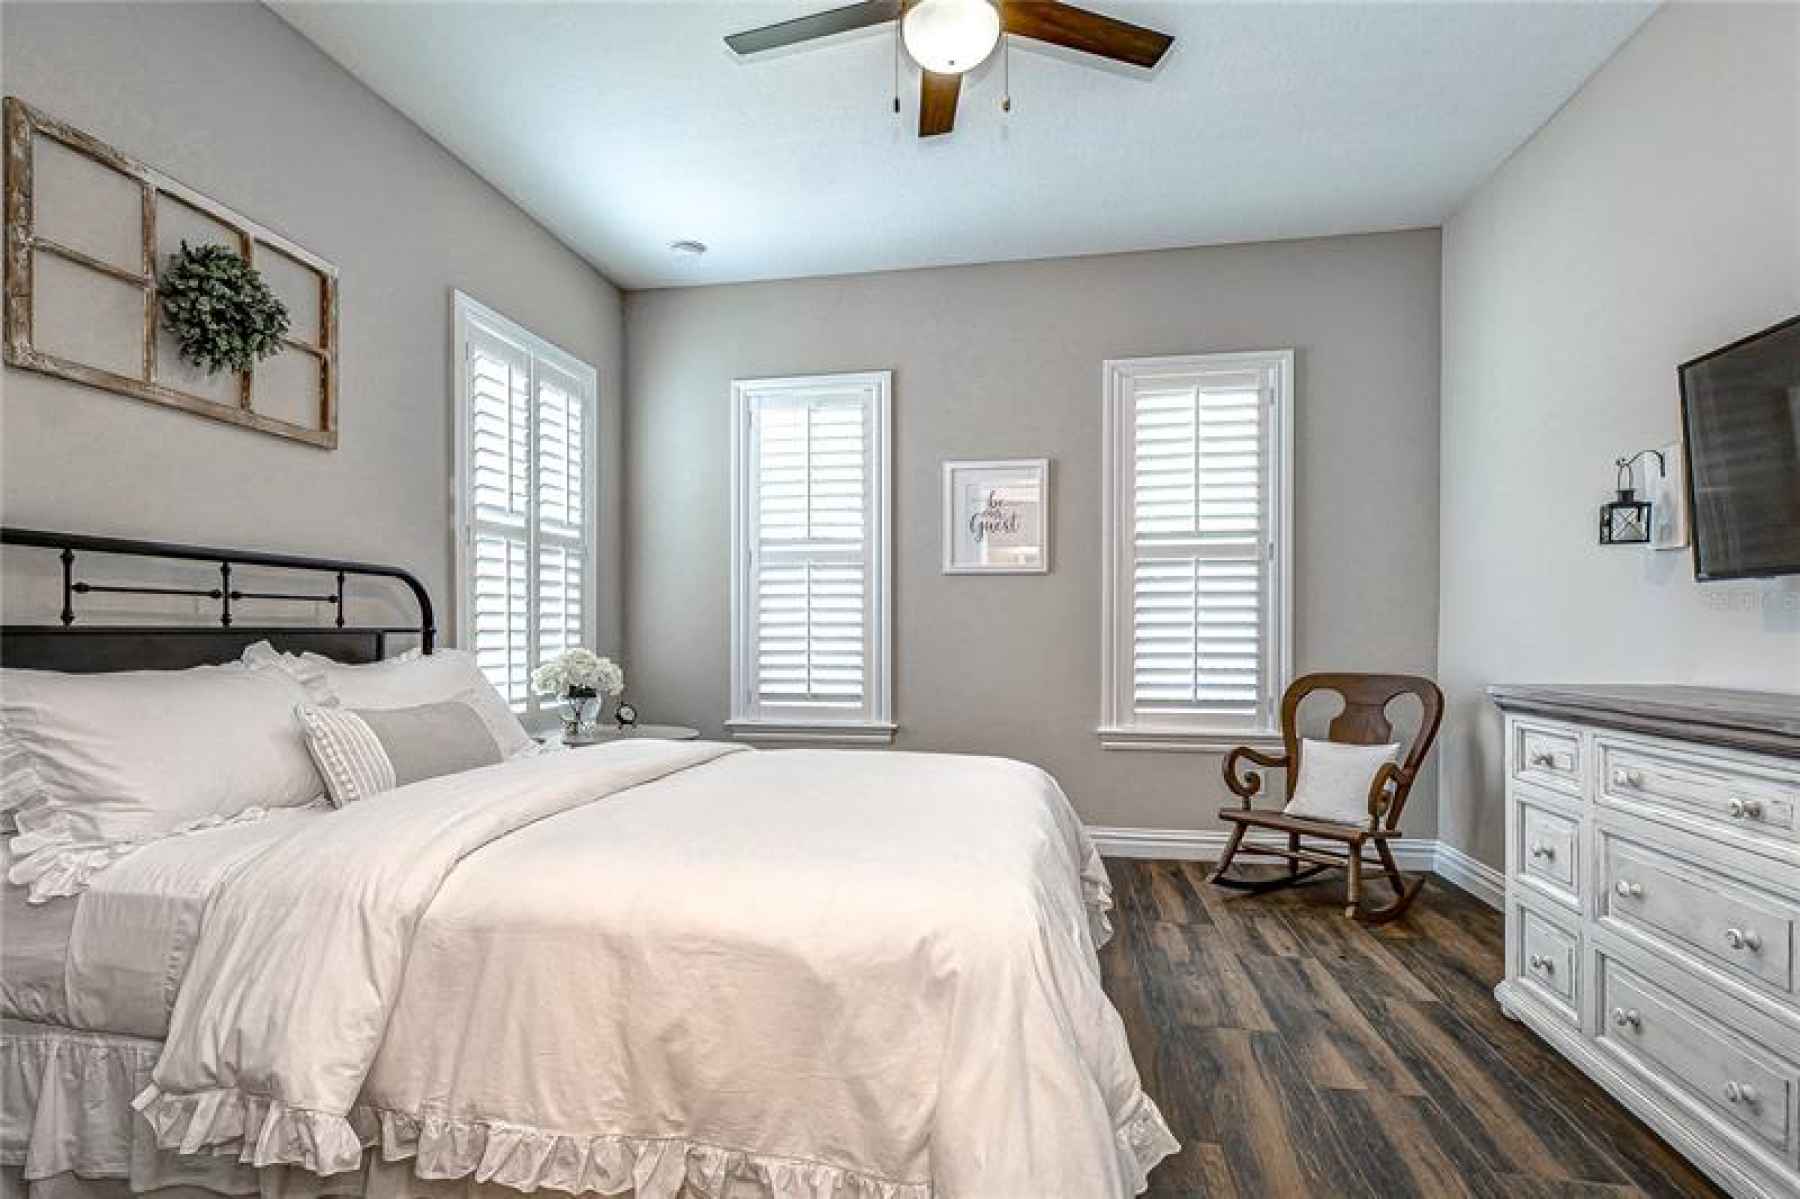 The upgrades don???t stop there; plantation shutters, upgraded light fixtures, neutral paint colors!